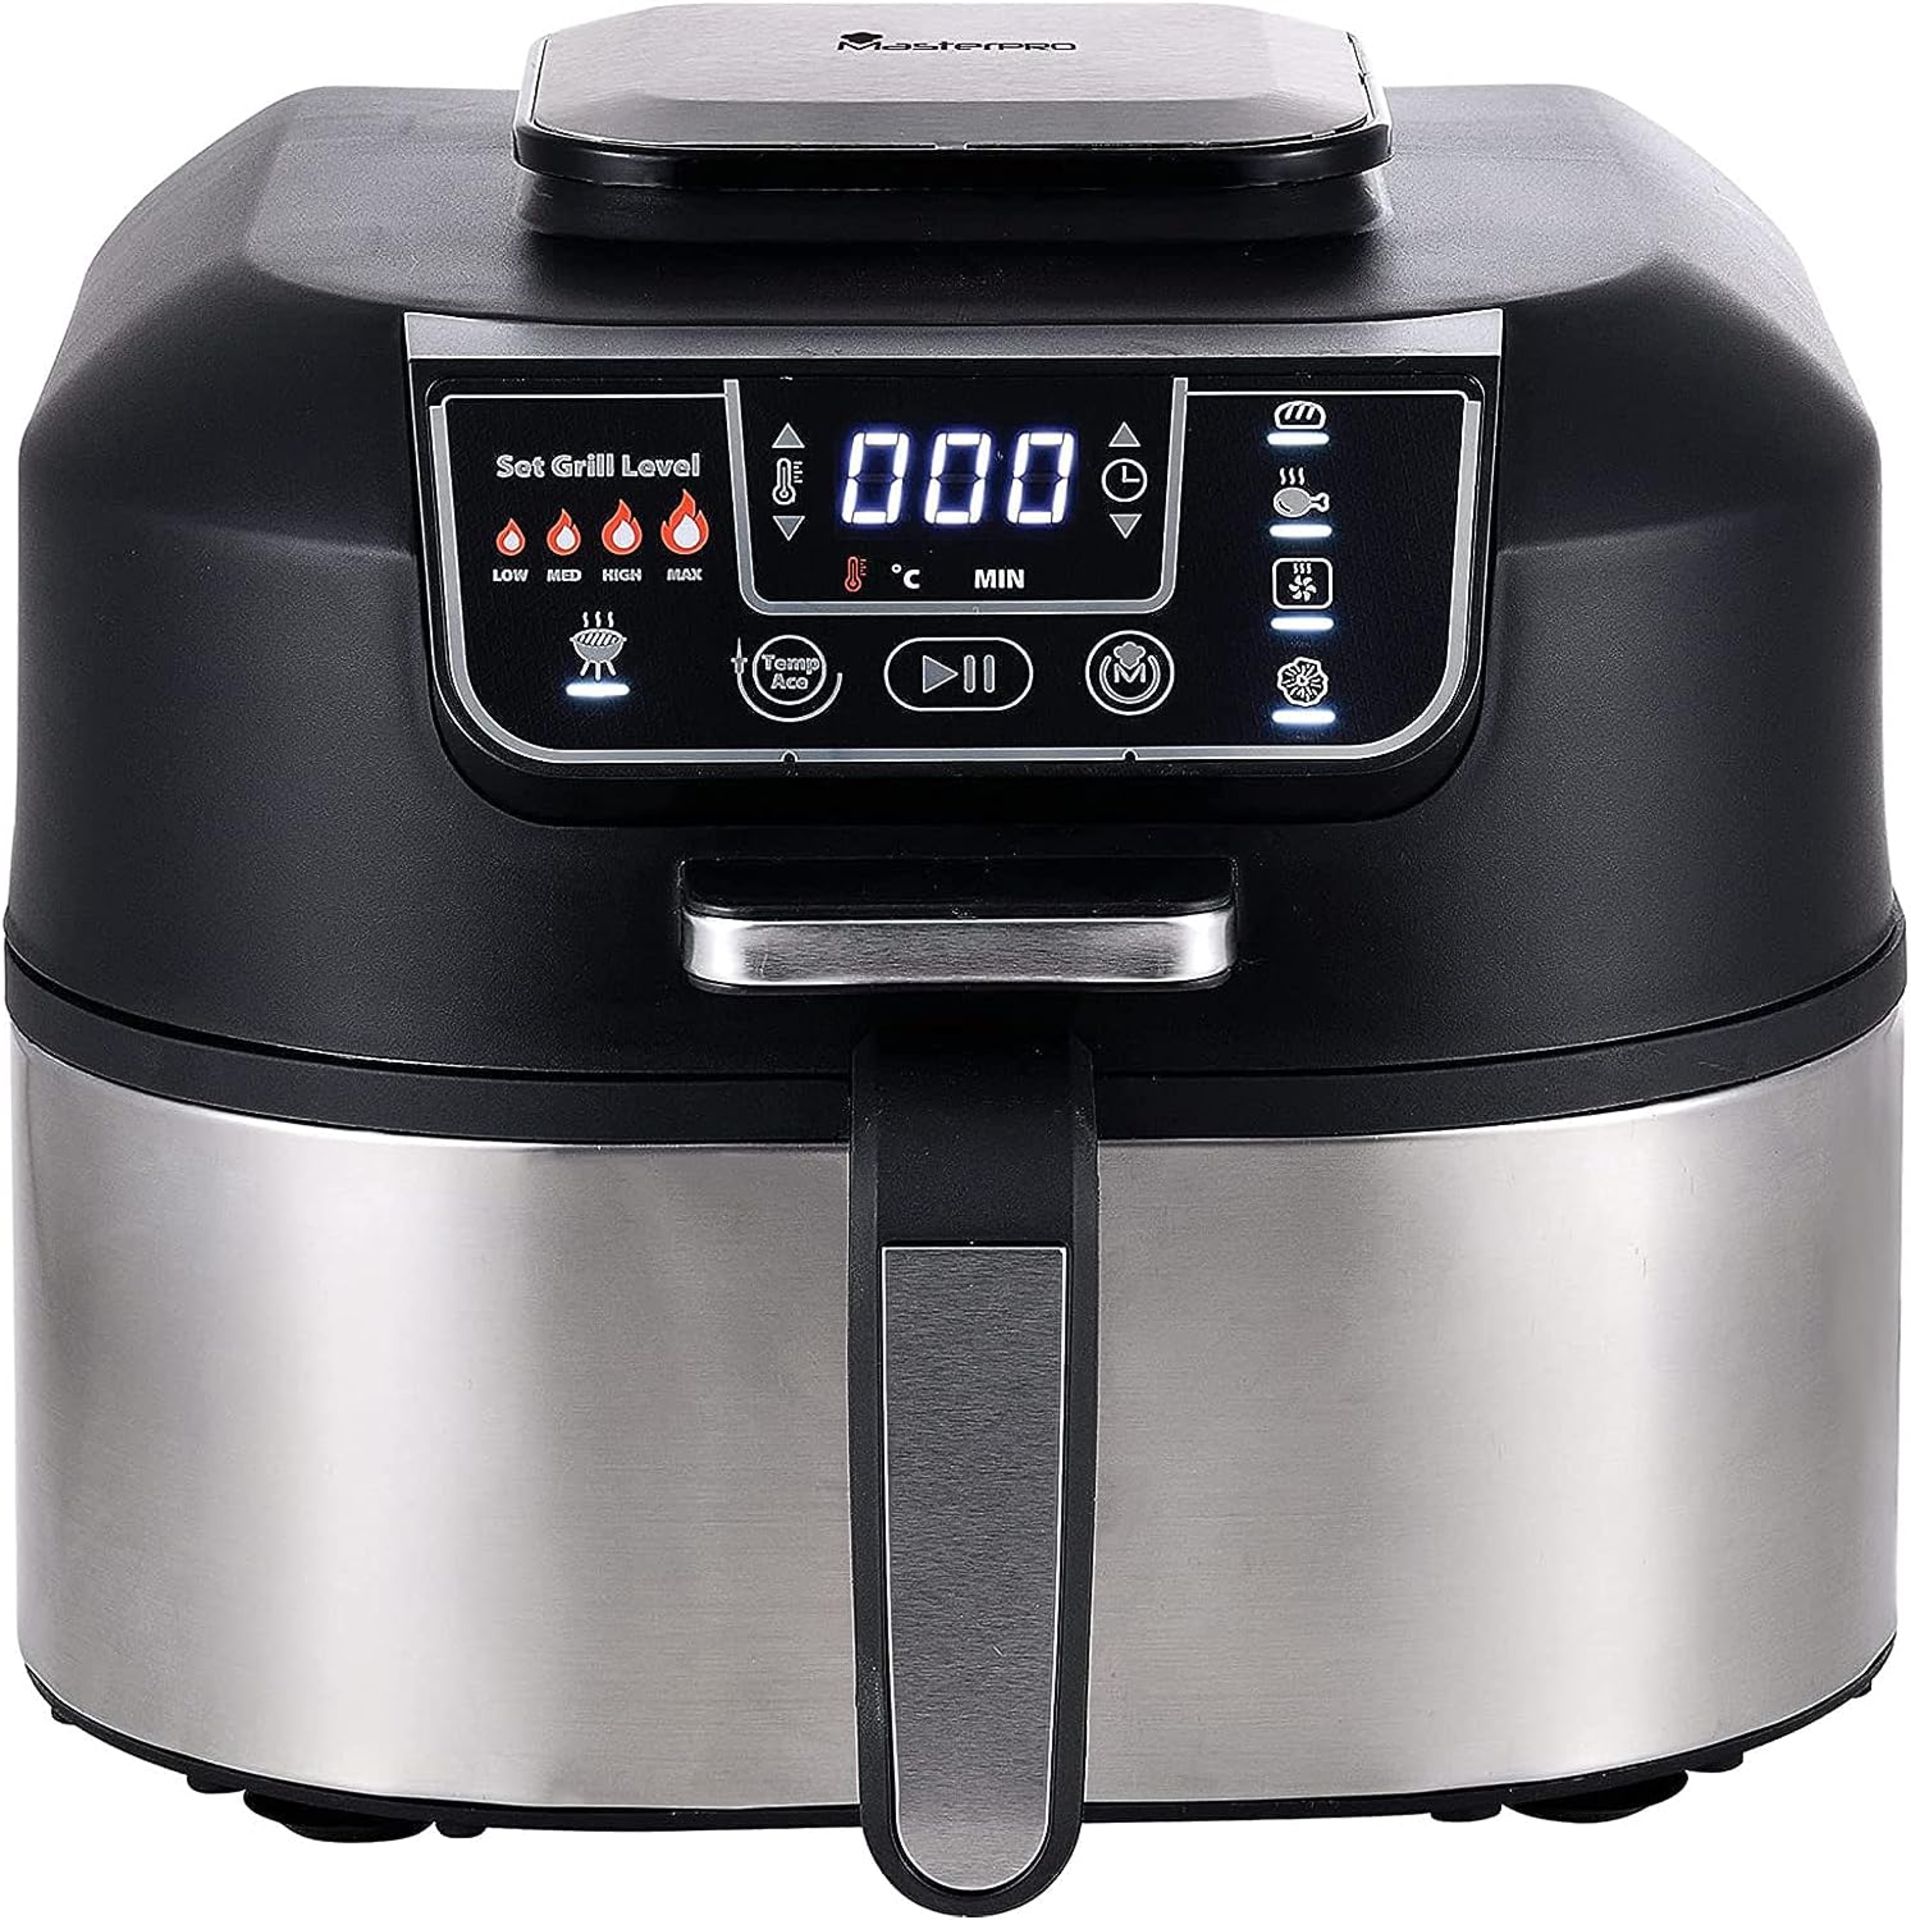 Brand New MasterPro Smokeless Grill, 5.6 Litre, 1760 W, One Touch Food Processor with Oil-Free